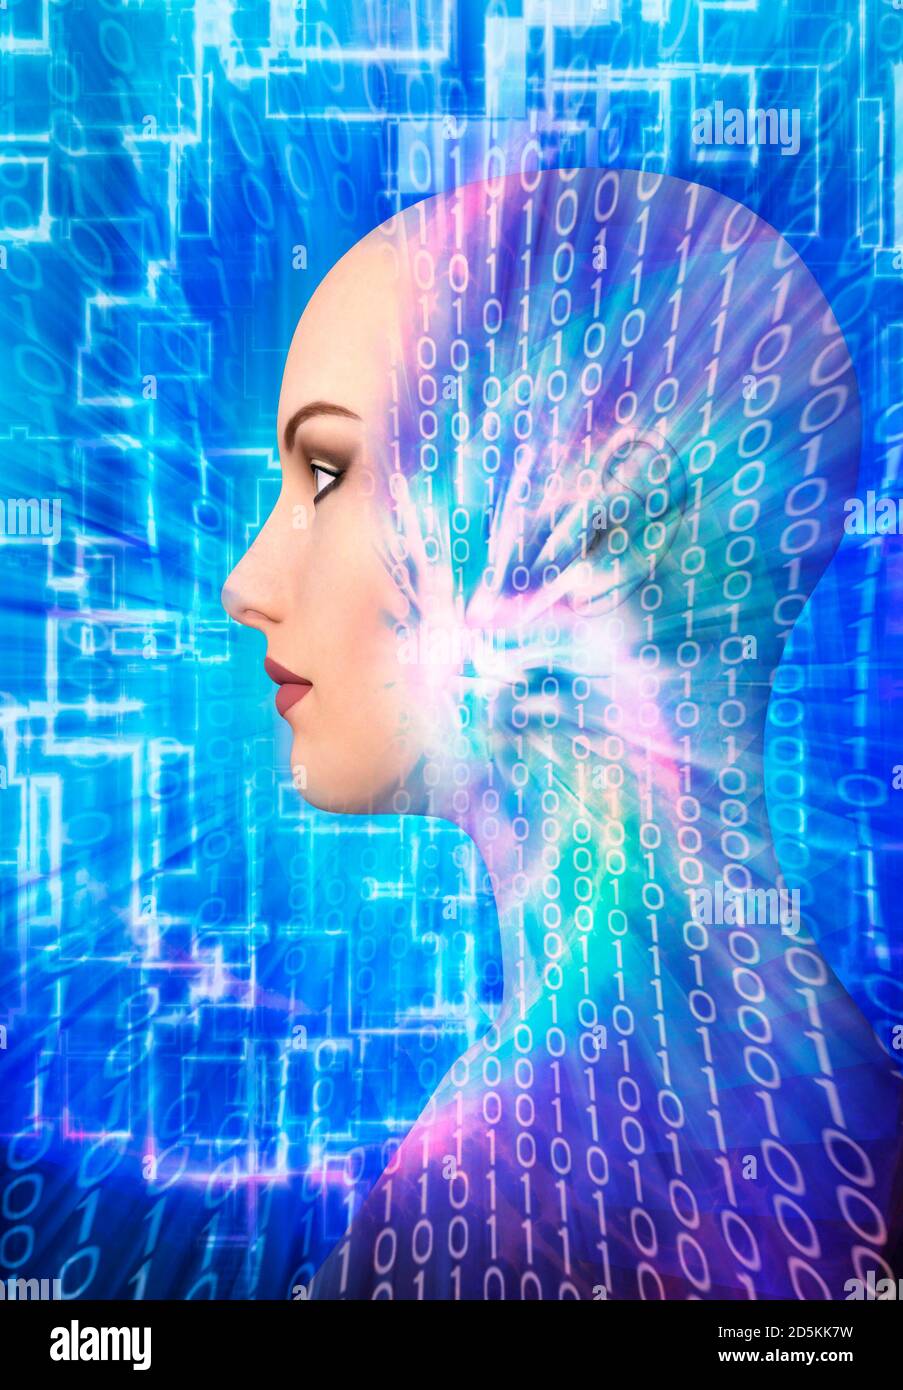 humanoid head artificial intelligence concept Stock Photo